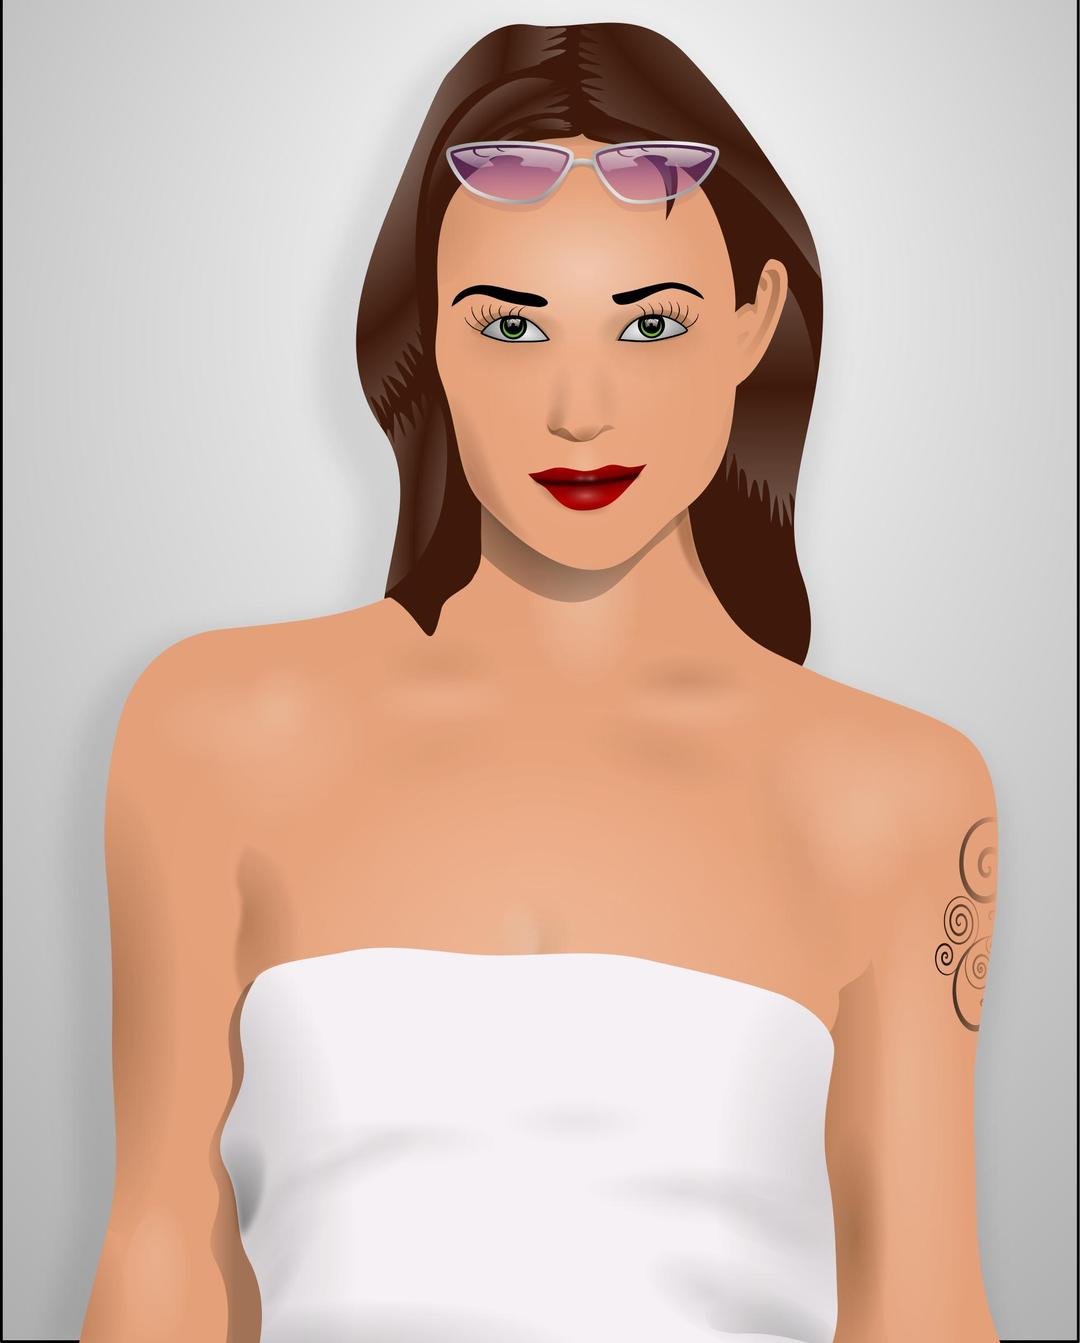 Attractive Woman with Sunglasses png transparent